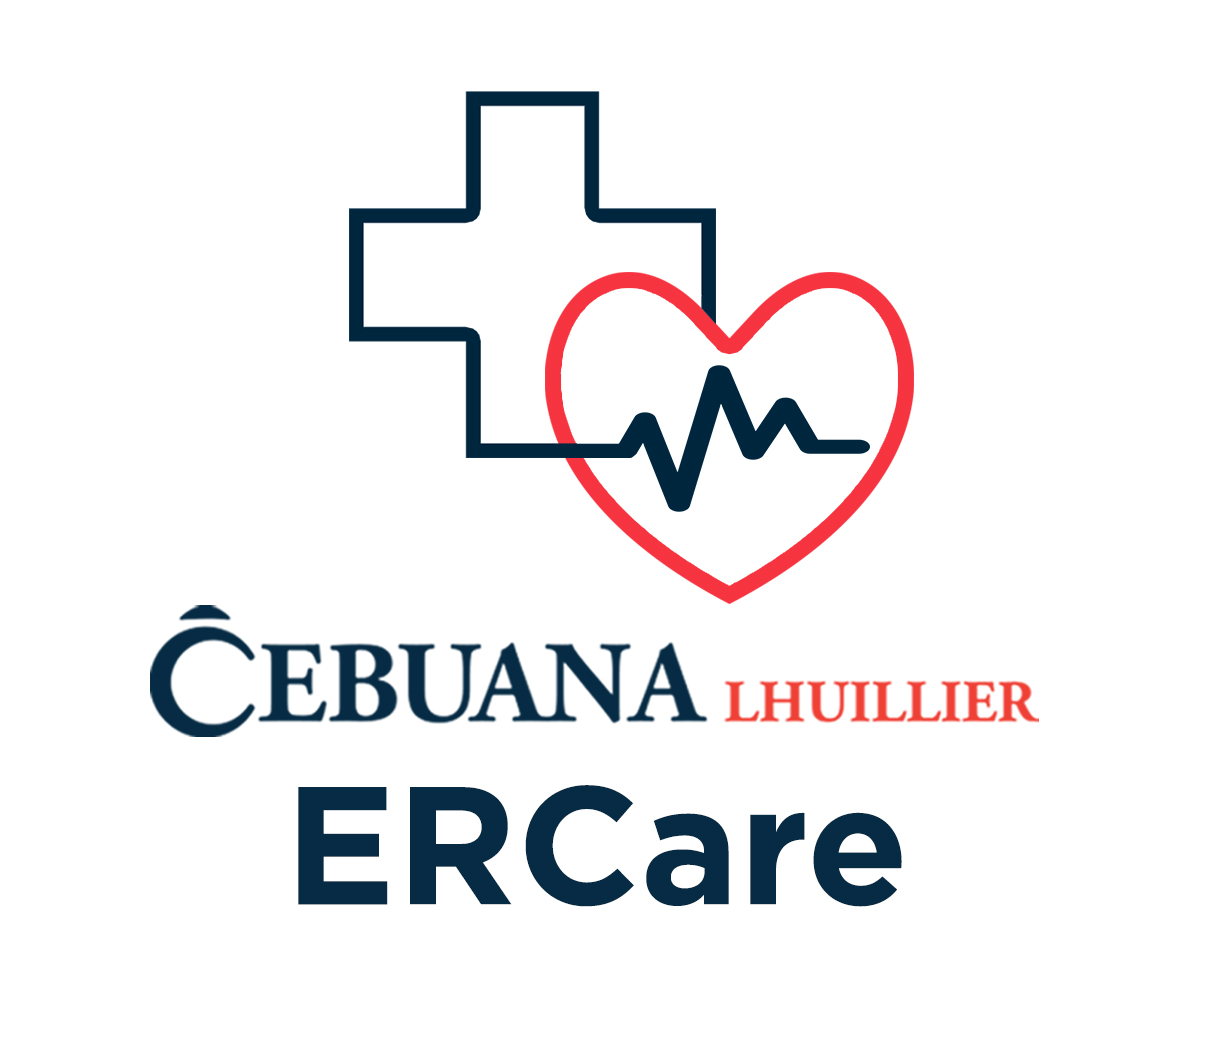 Cebuana Lhuillier | Cebuana Lhuillier ERCare covers the medical expenses incurred by the Insured
                        Person for the treatment of an eligible emergency condition, availment of which can
                        either be as an Out-Patient in the Emergency Room Department or as an In-Patient of a
                        Hospital via cash assistance.